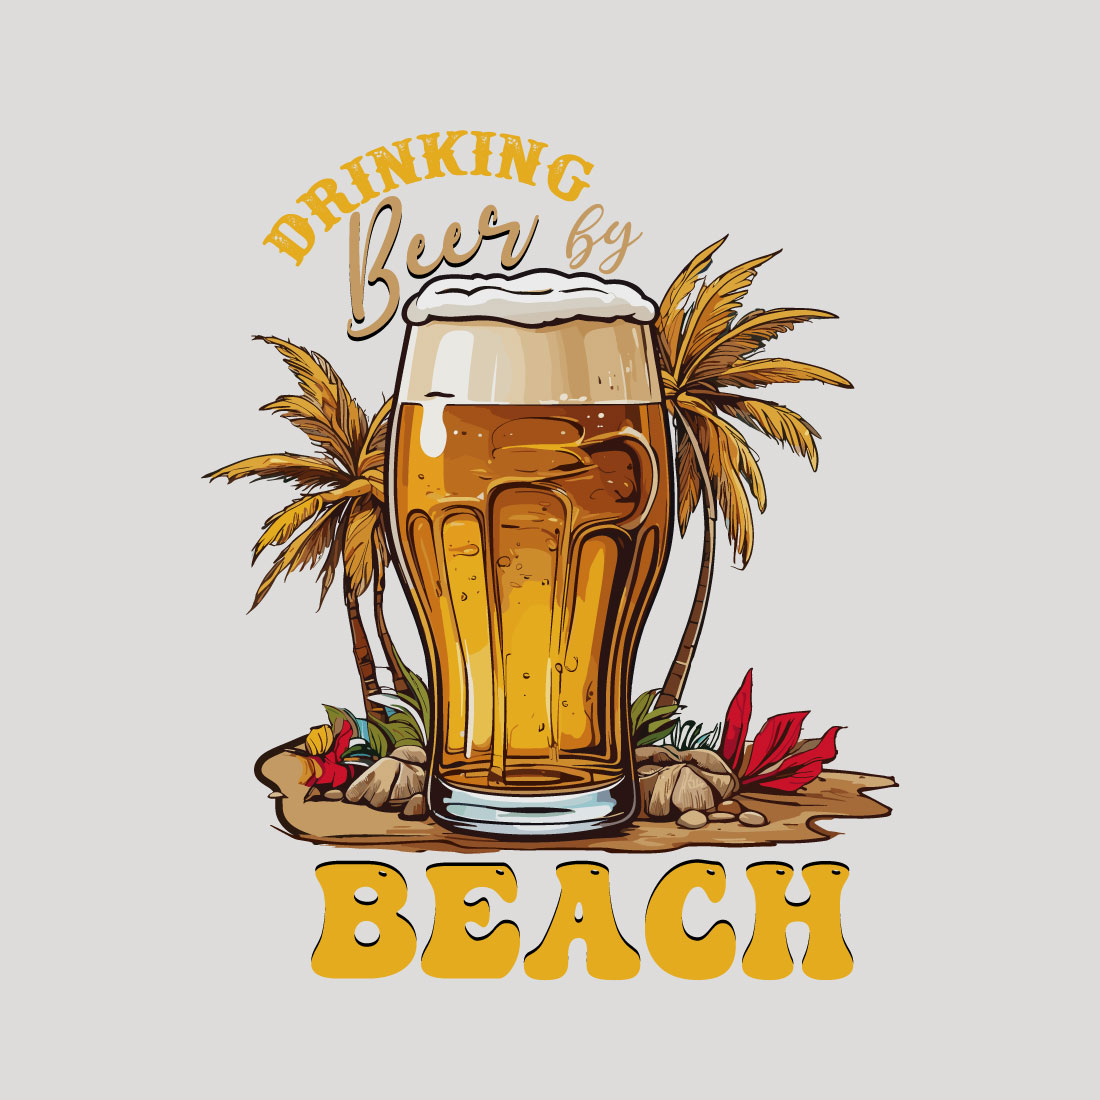 drinking beer by beach 703